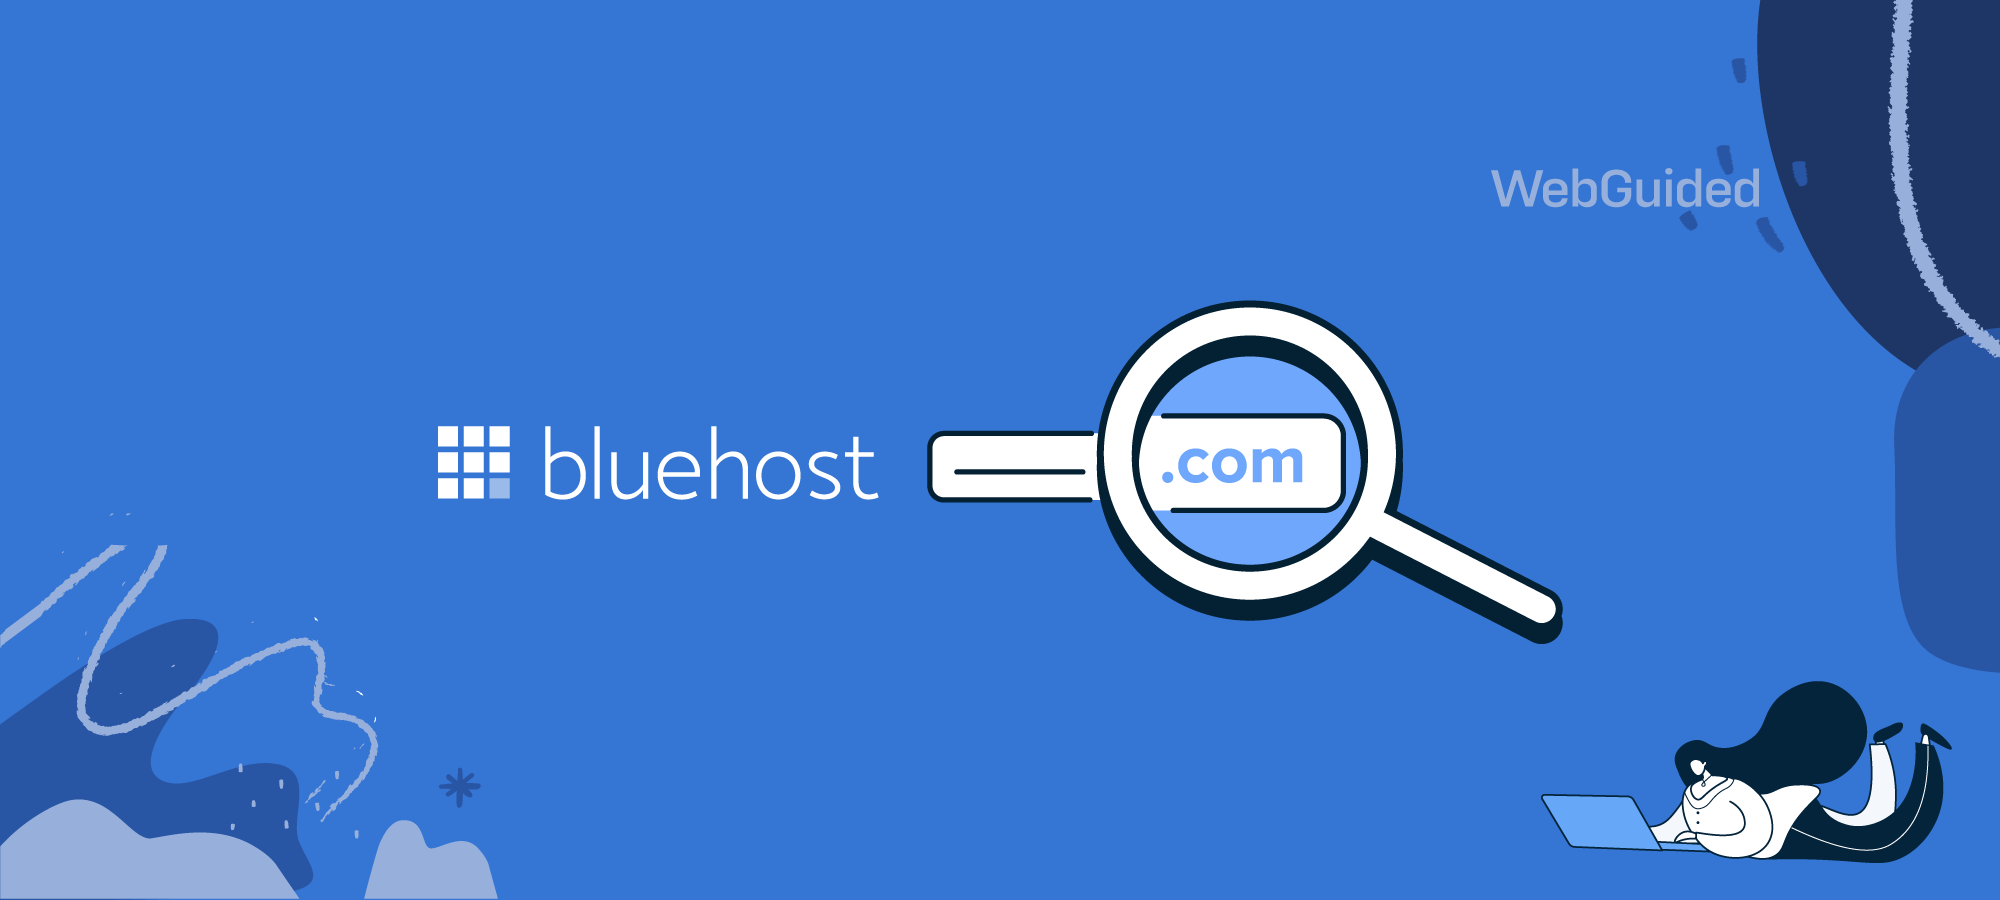 Bluehost Free Domain Name Deal Register